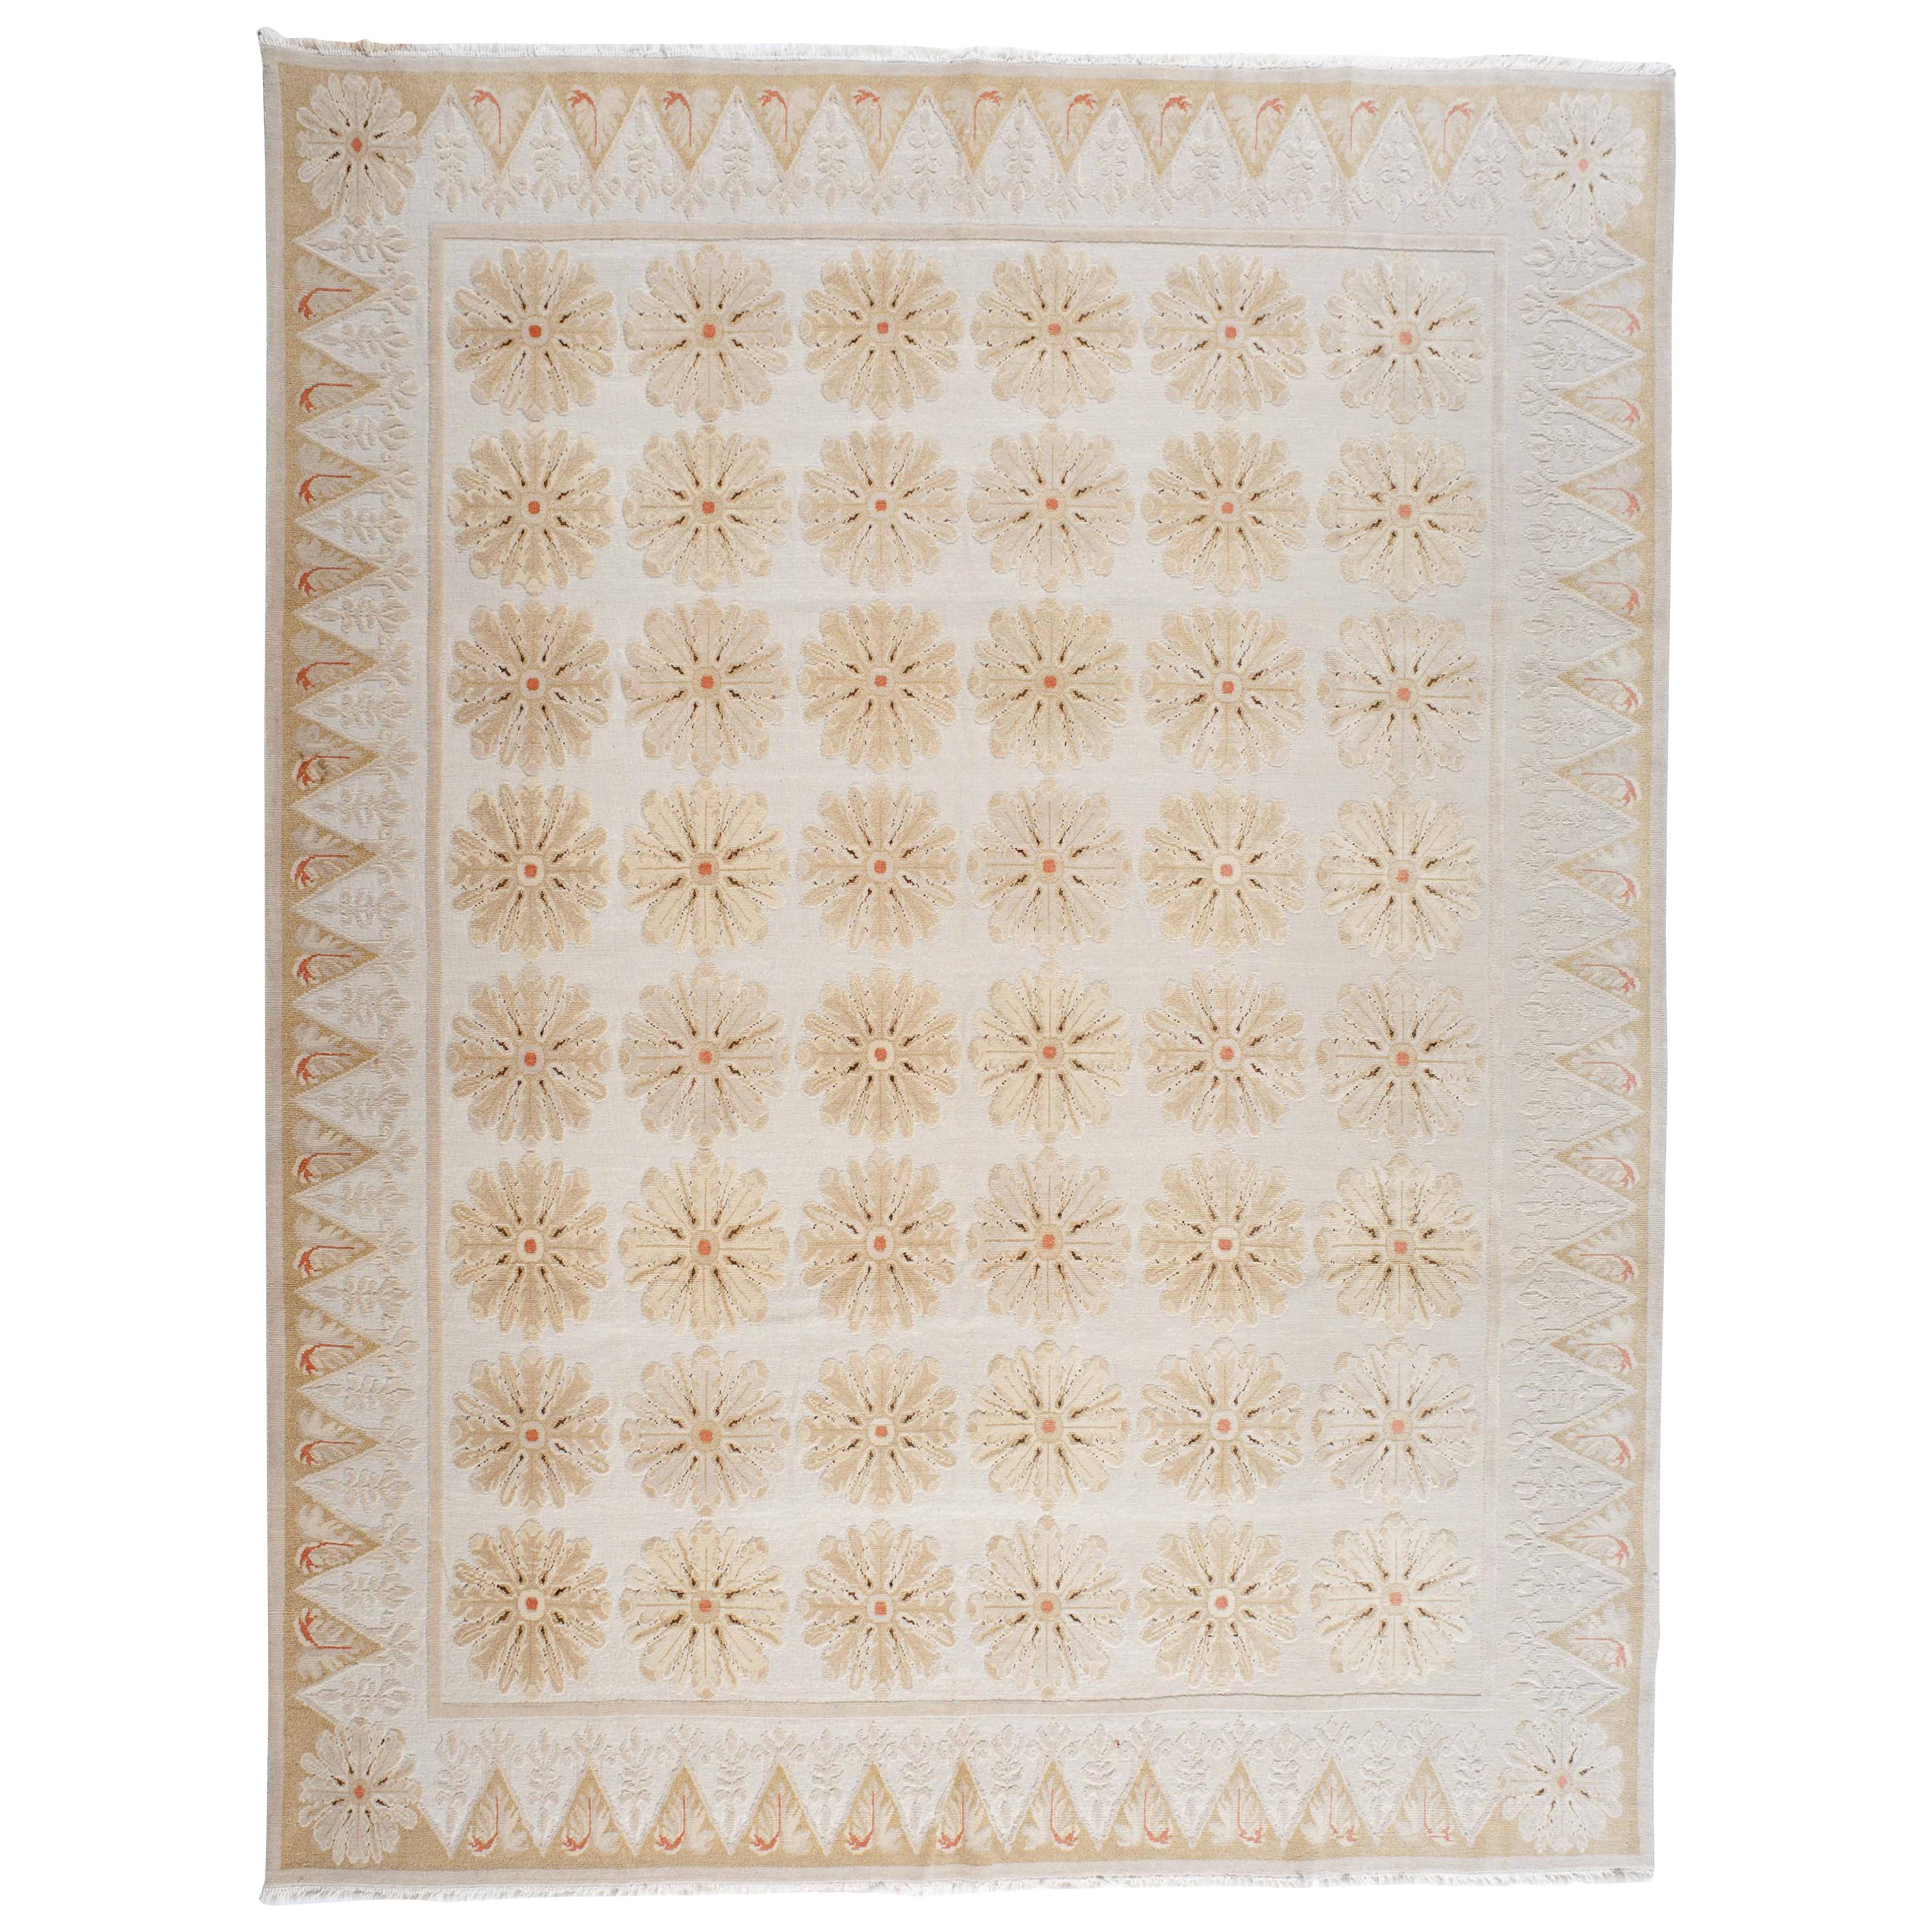 Gold Tone Floral Rug For Sale